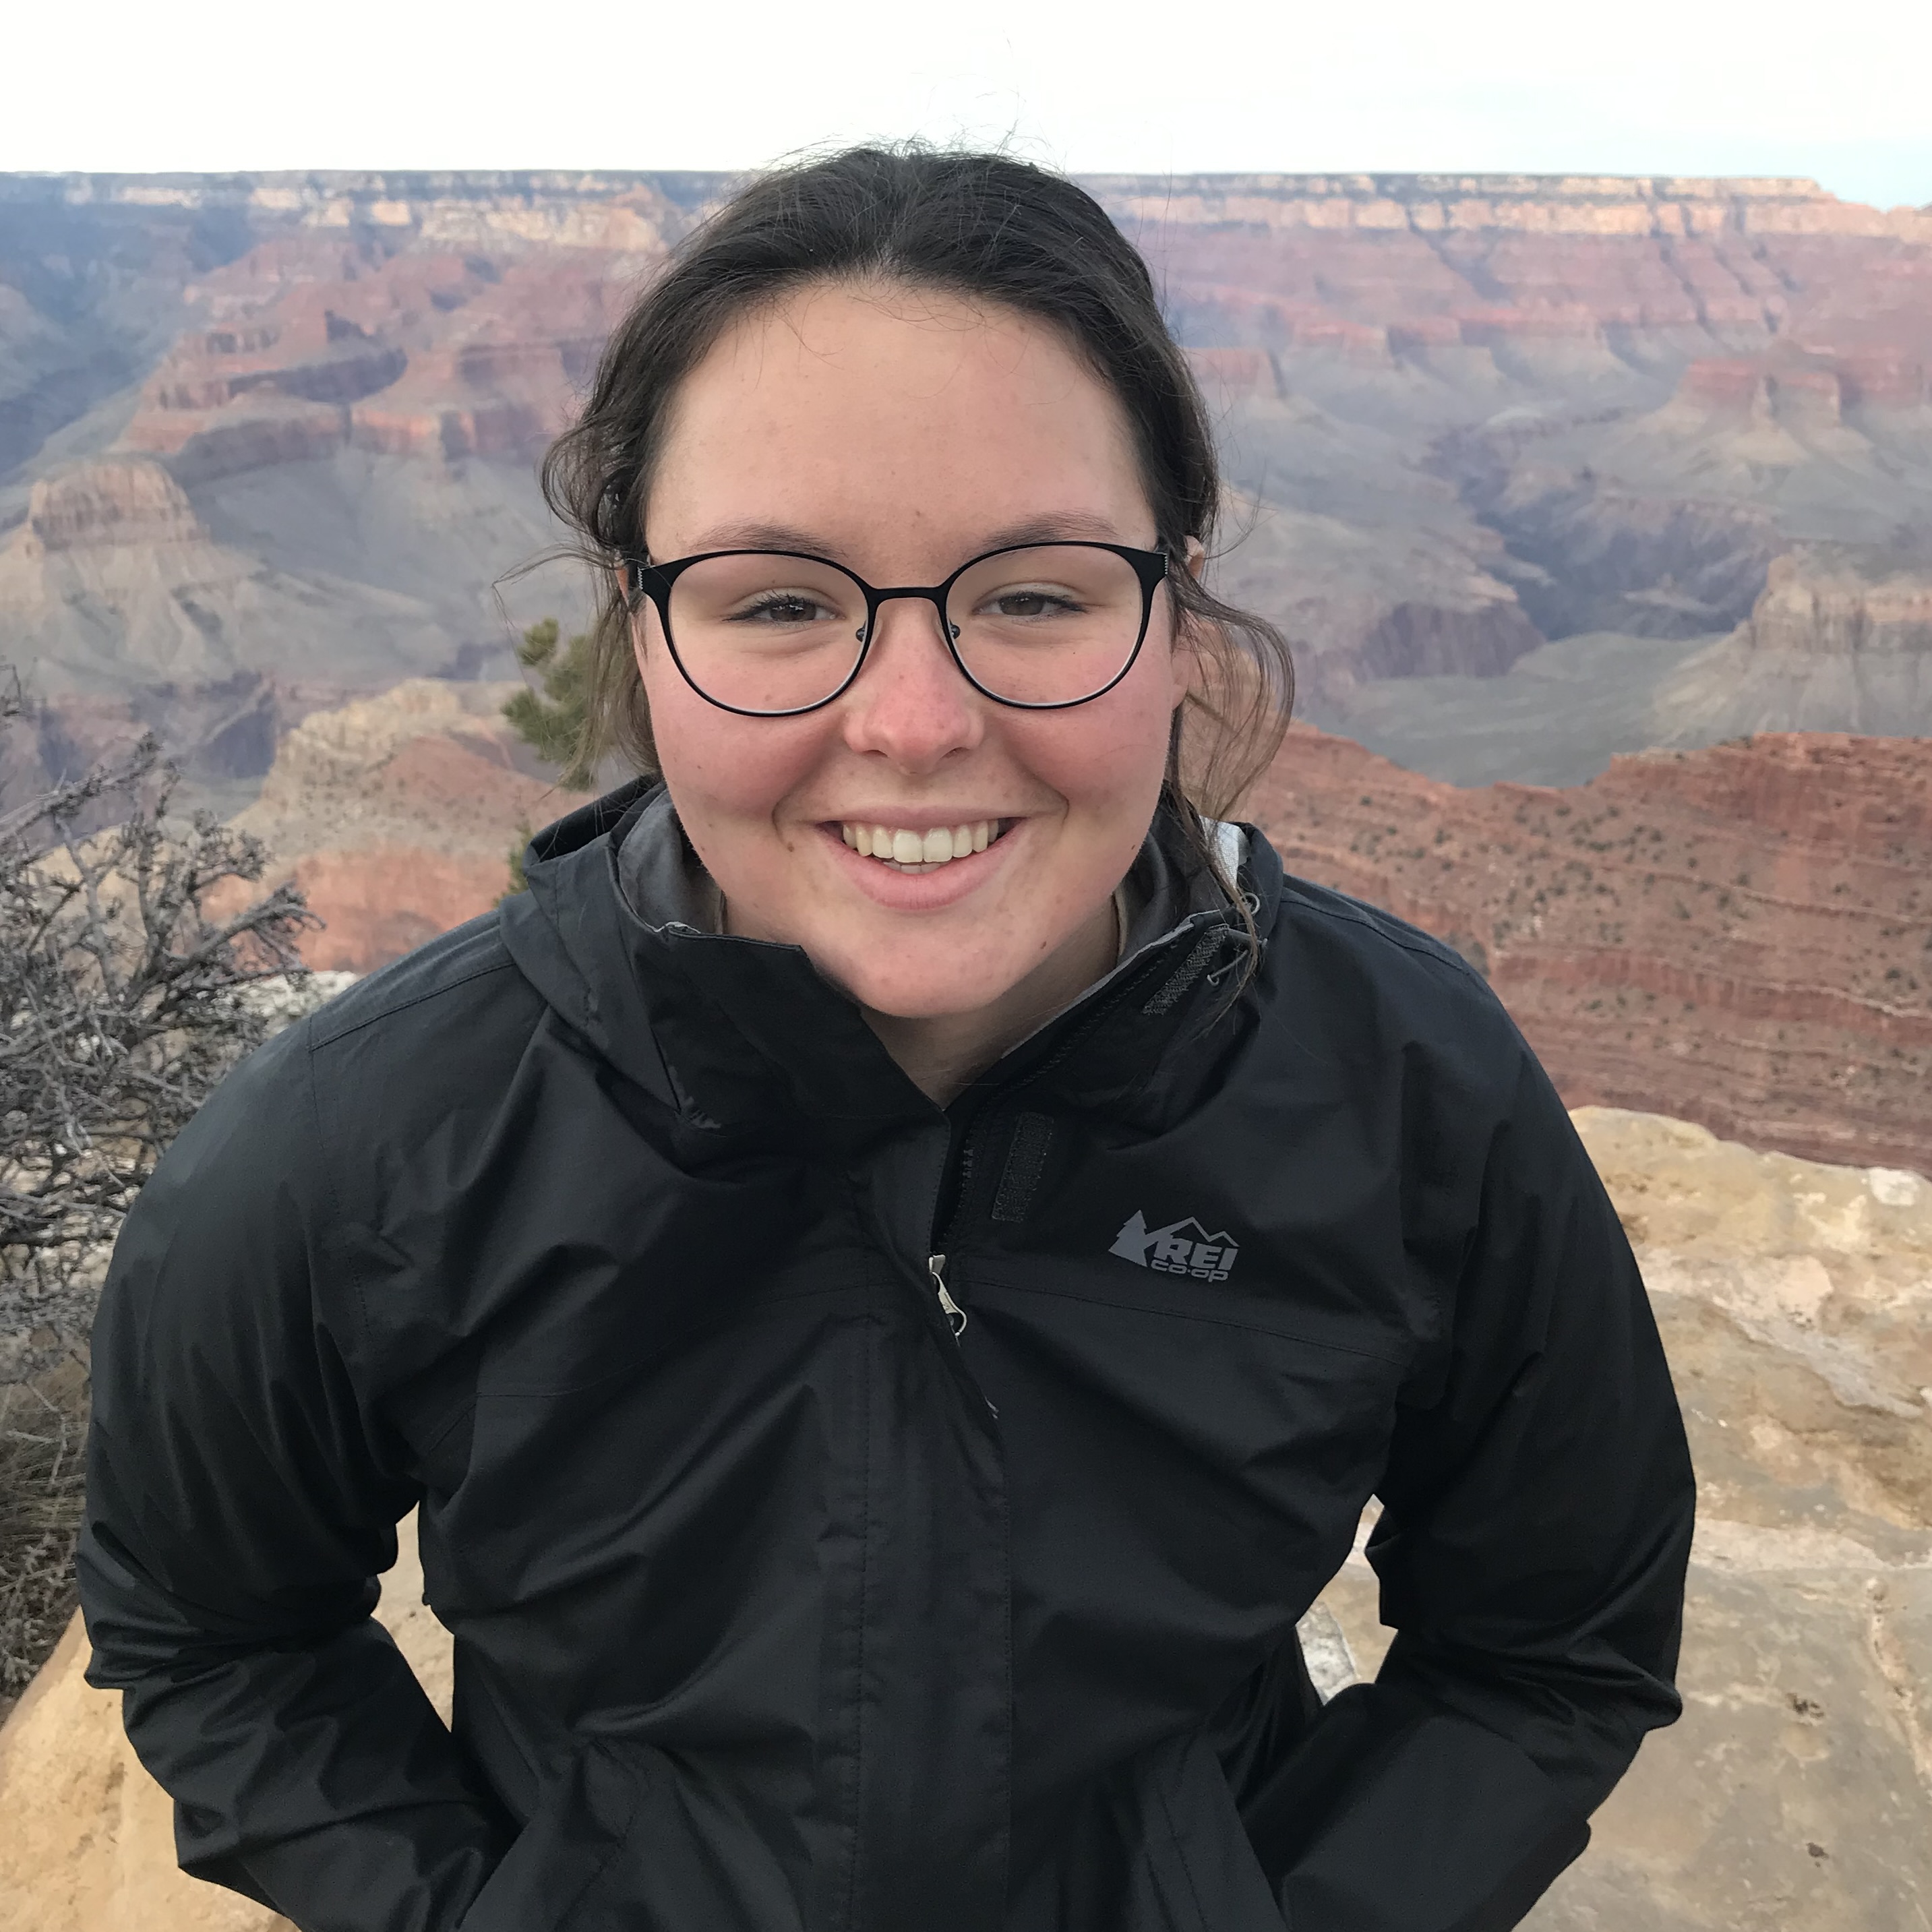 Katie Blessington is a white woman with long dark hair and dark glasses, here she is wearing a parka with the spetacular Grand Canyon as backdrop.